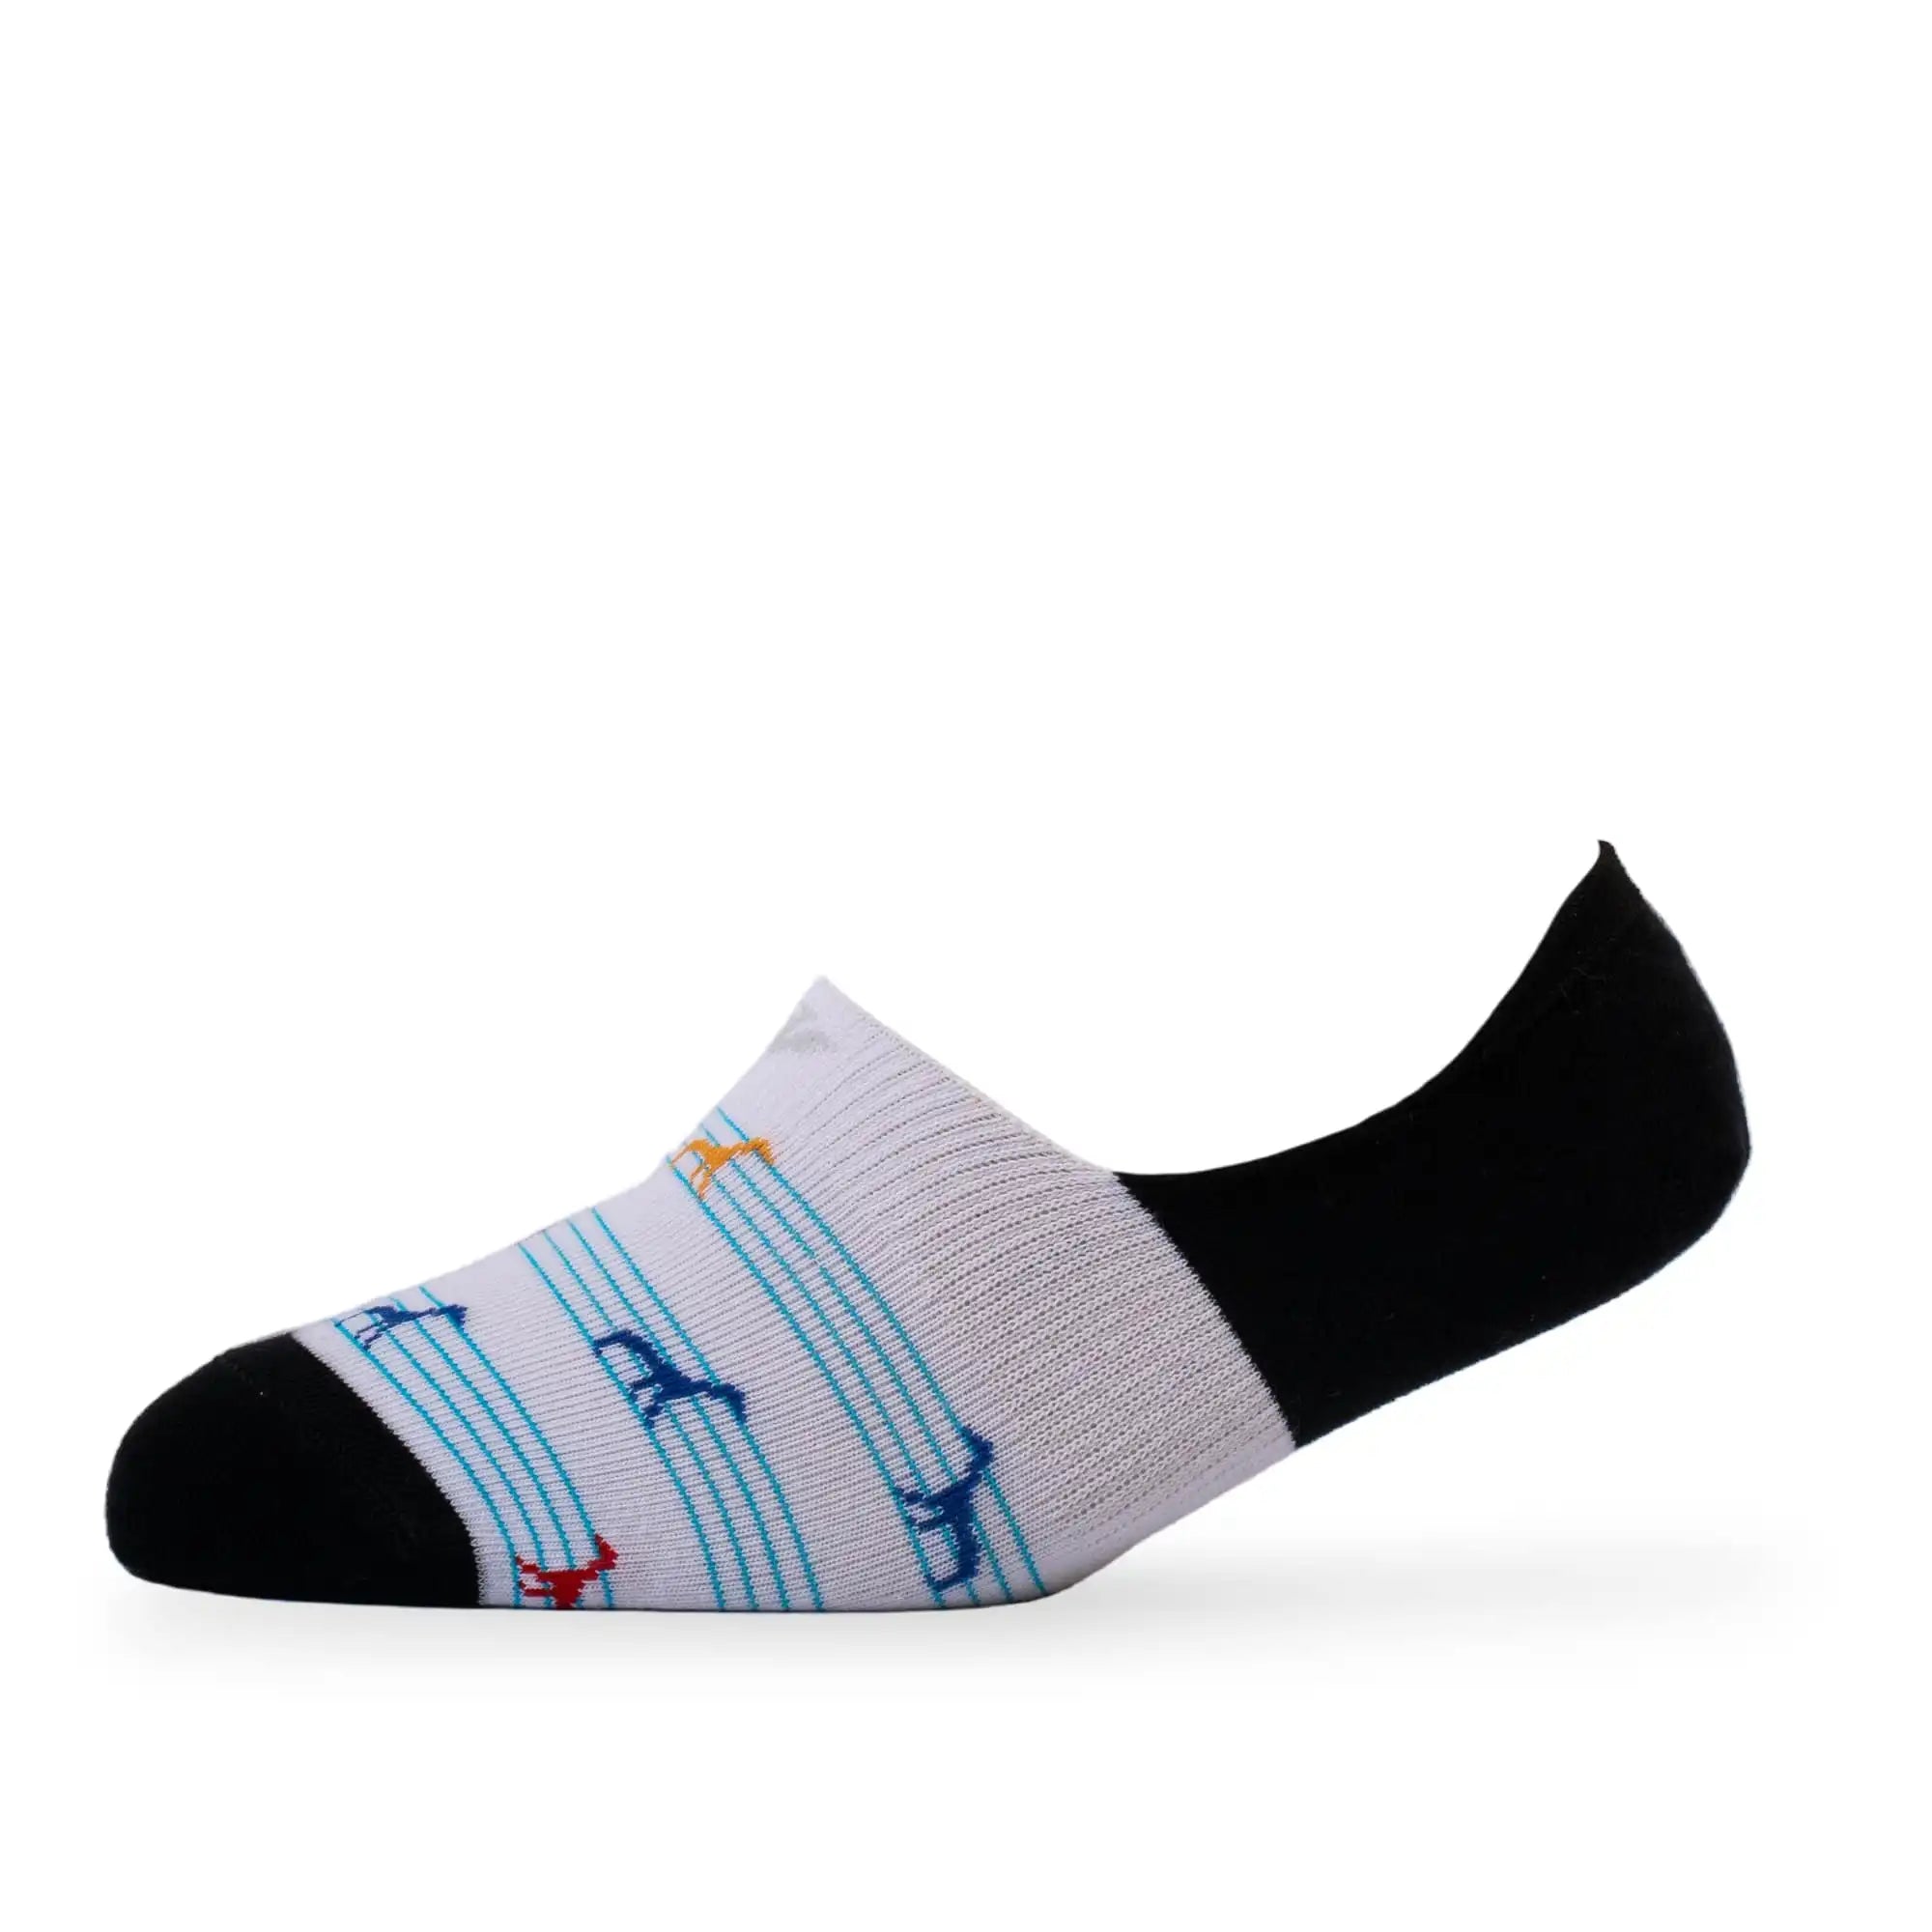 Young Wings Men's Multi Colour Cotton Fabric Design No-Show Socks - Pack of 5, Style no. M1-113 N